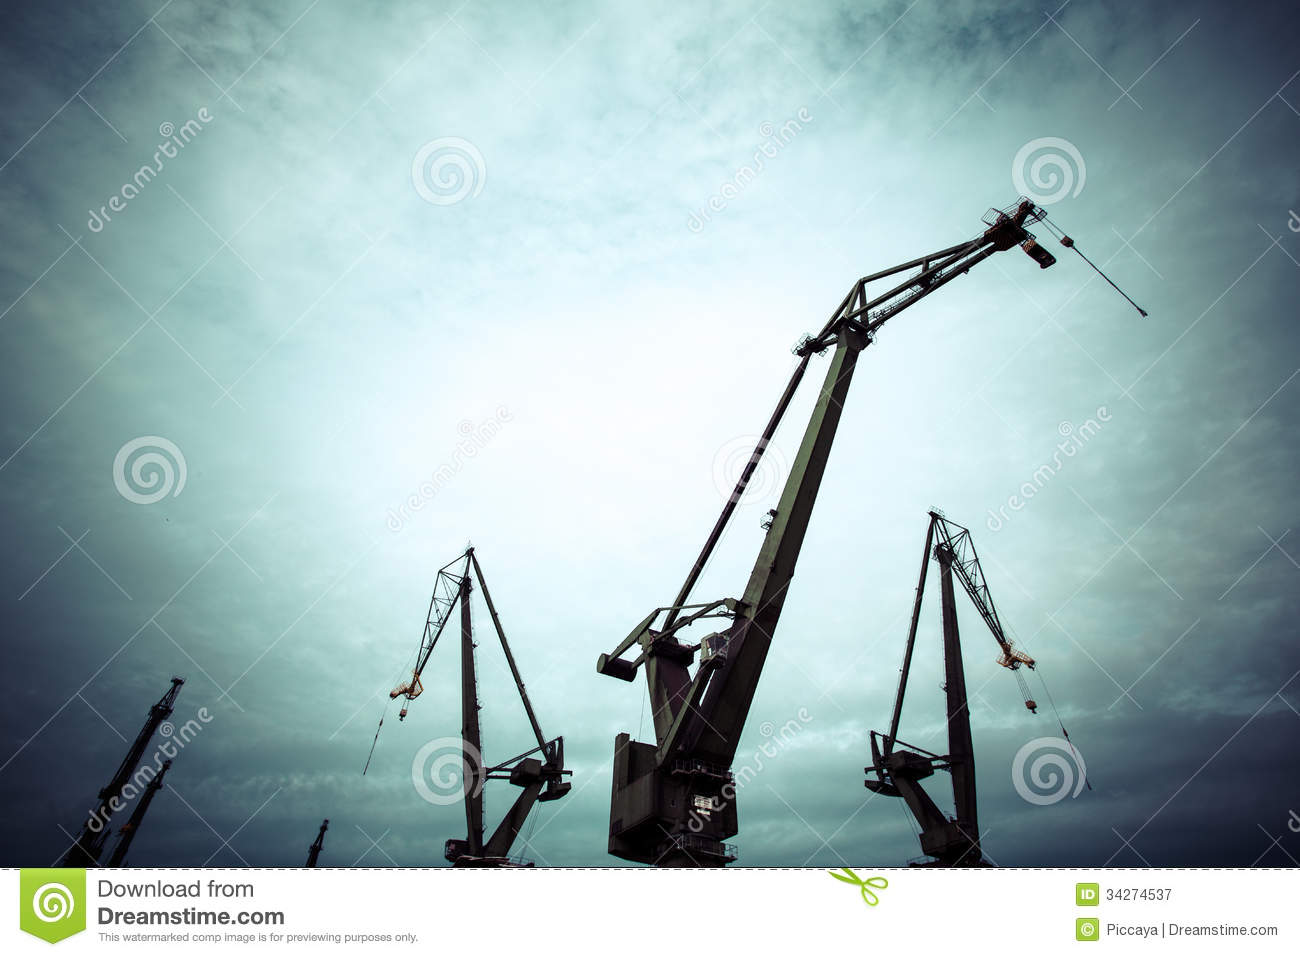 Silhouettes Of Industrial Cranes In Gdansk Shipyard Royalty Free.